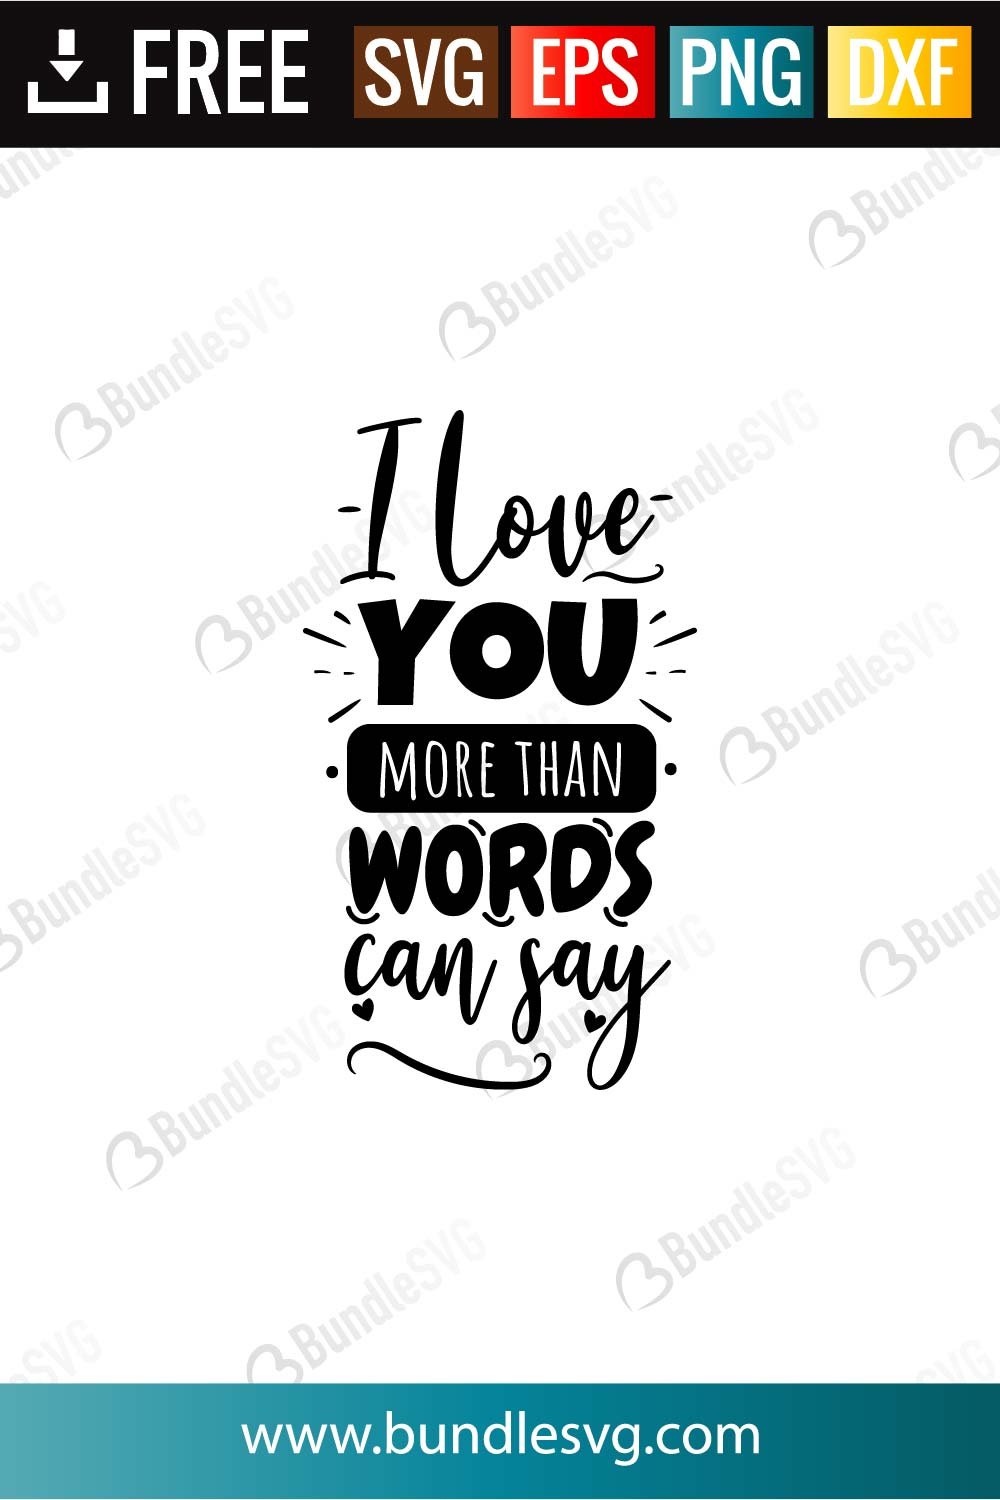 I Love You More Than Words Can Say Svg Files Bundlesvg